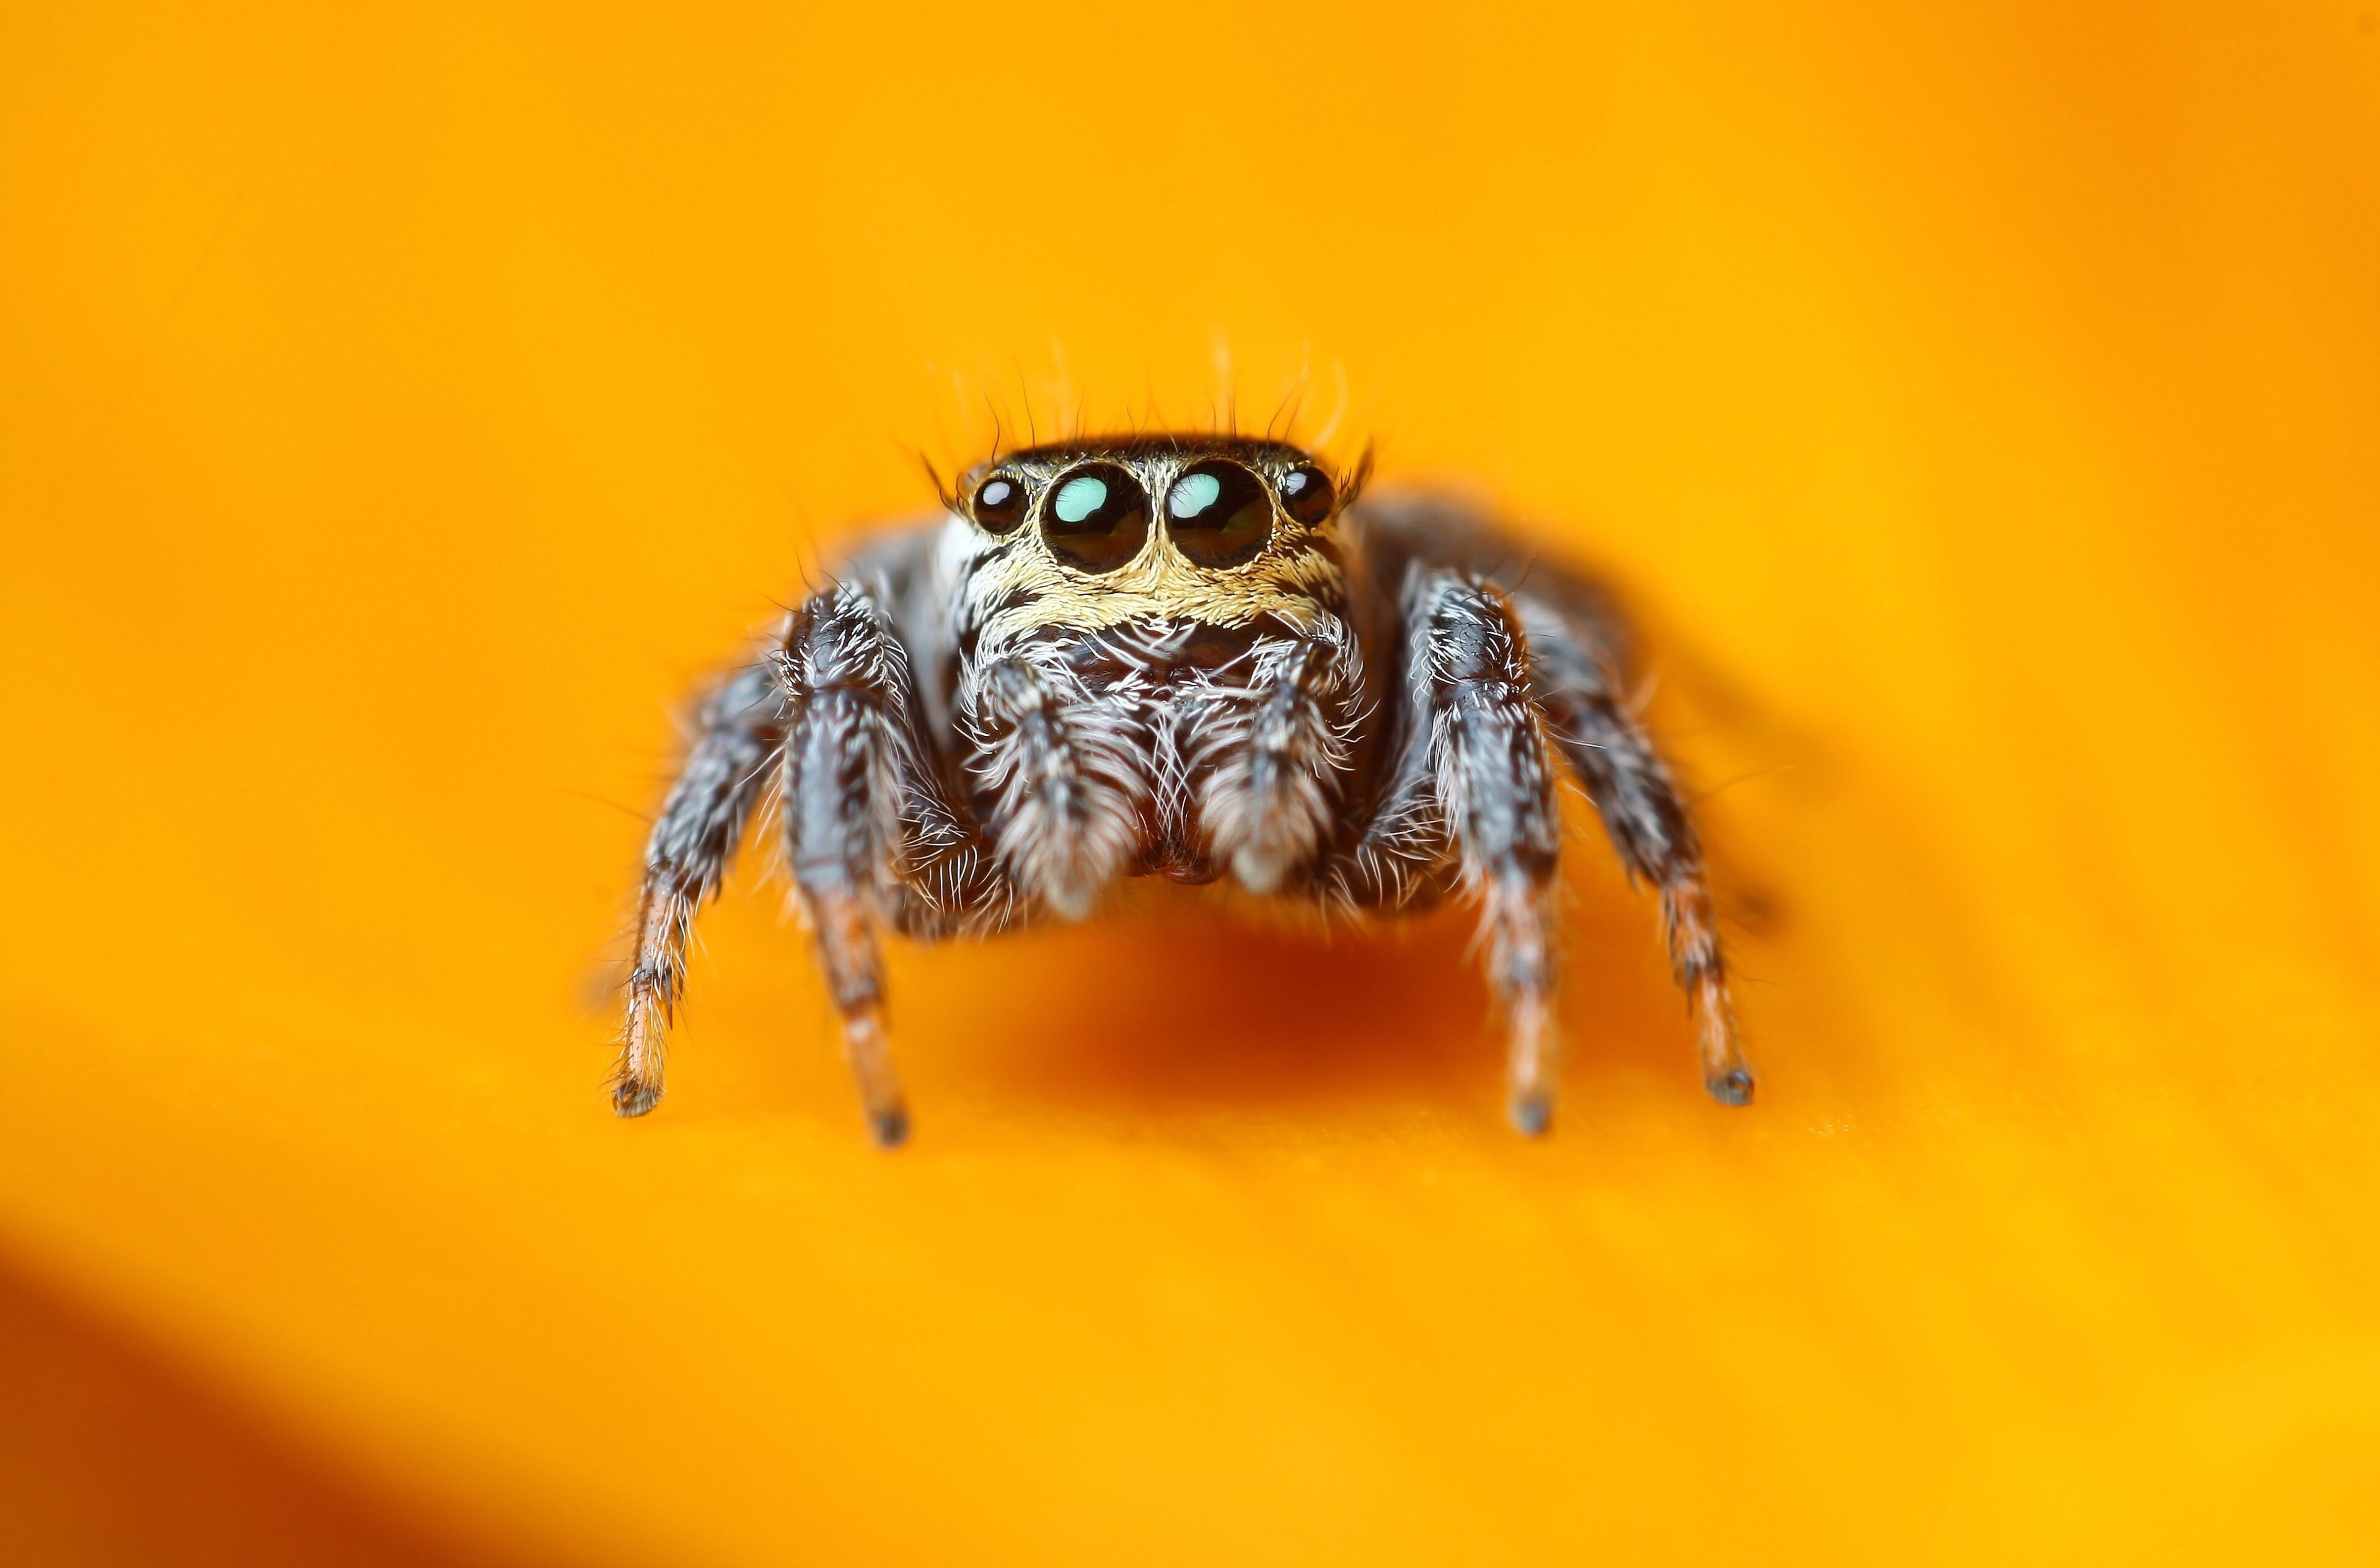 jumping spider 4k high quality image. Jumping spider, Animals, Insects